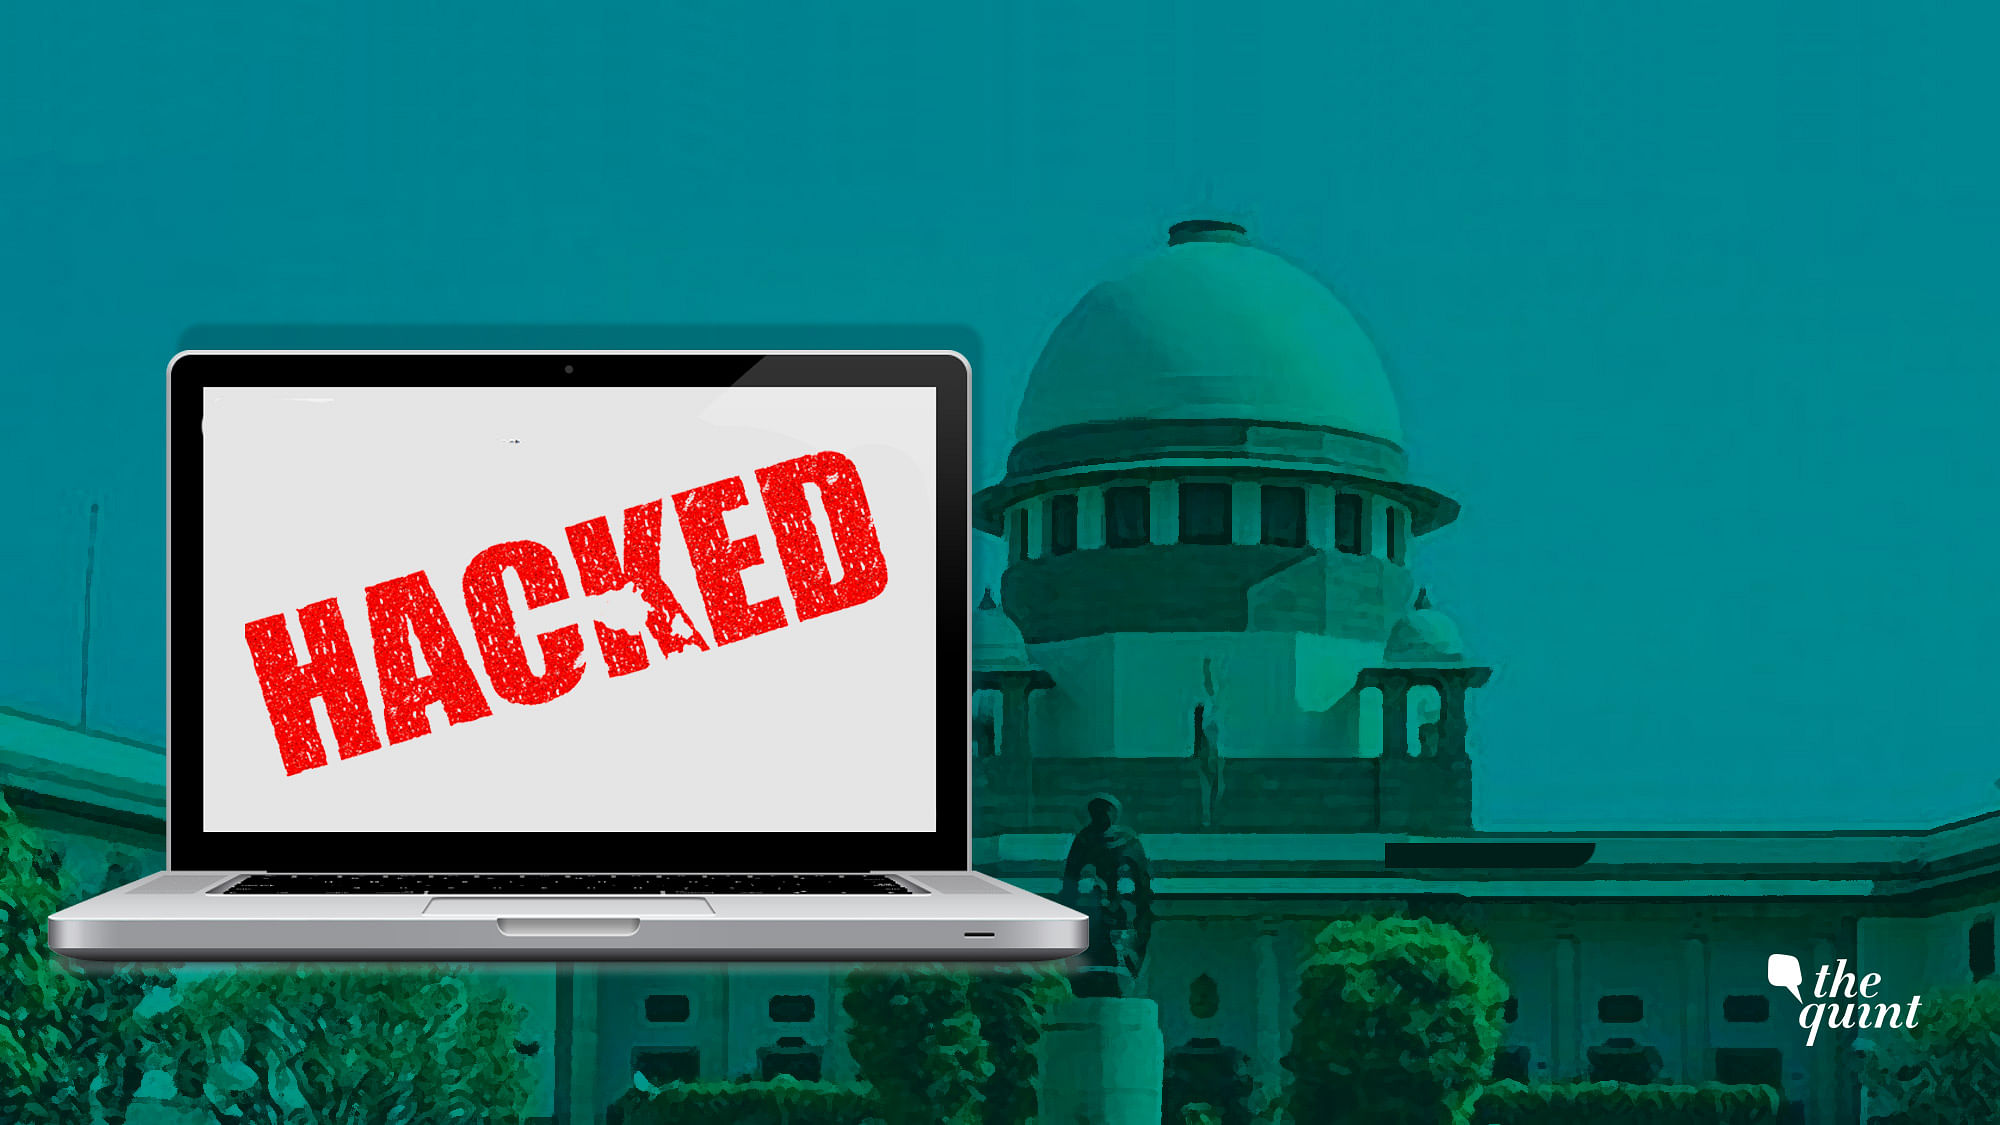 Supreme Court of India’s website was hacked allegedly by Brazilian hackers.